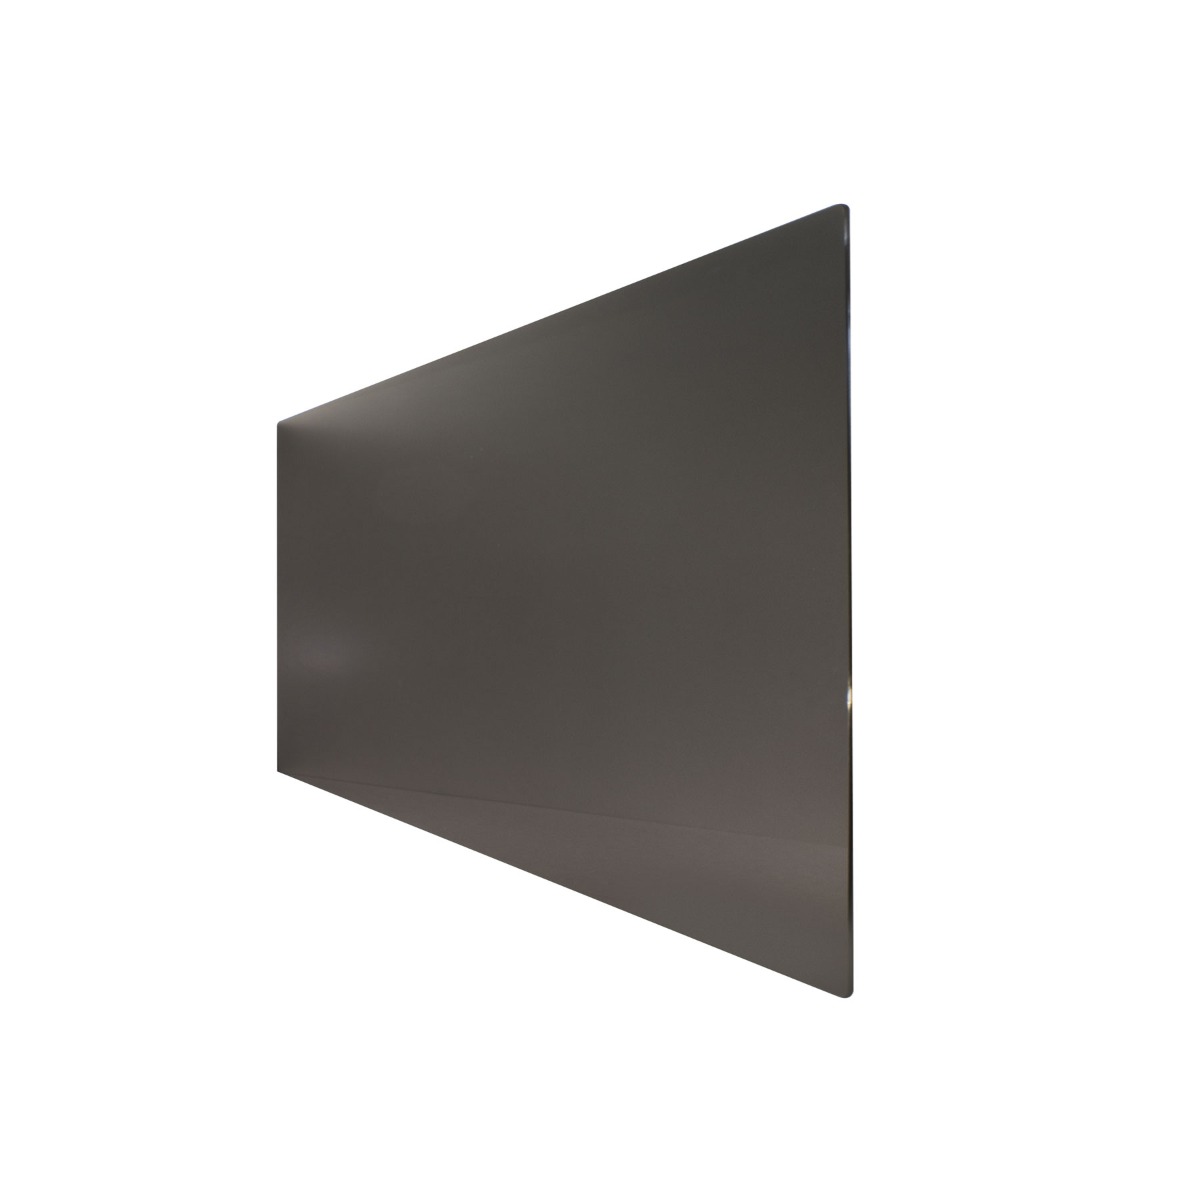 Technotherm ISP Design Glass Infrared Heating Panel - Black 350w (1050 x 454mm)